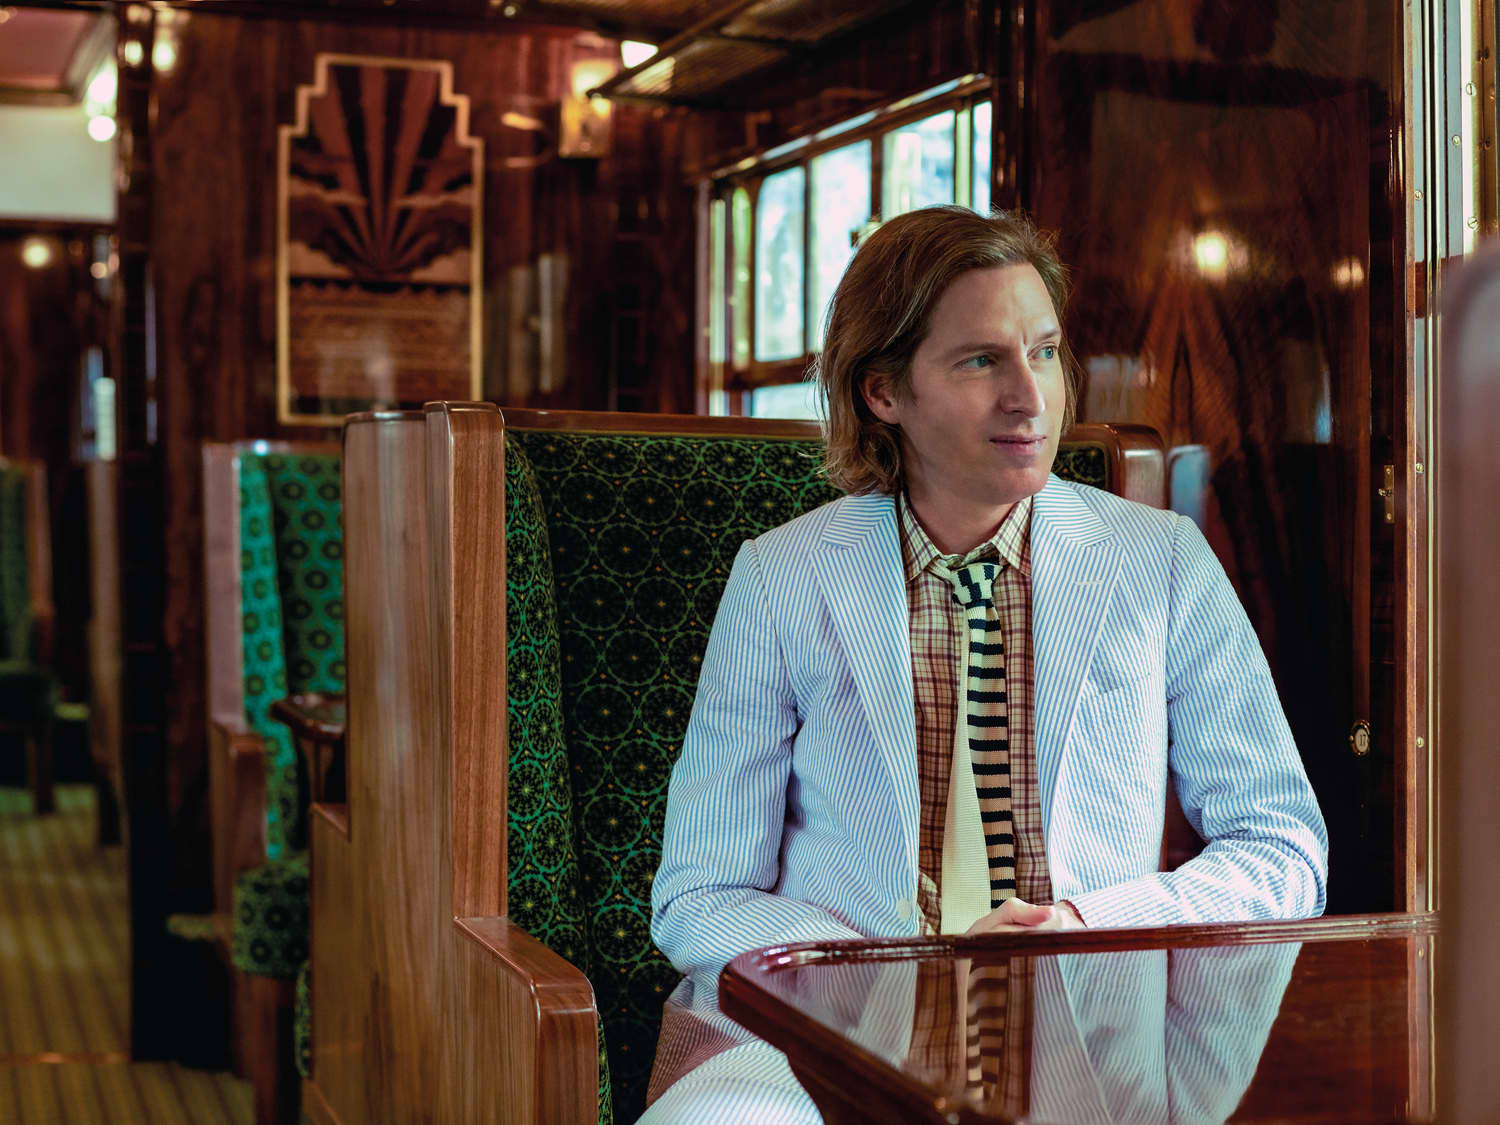 The Travel Bag inspired by Wes Anderson's The Darjeeling Limited